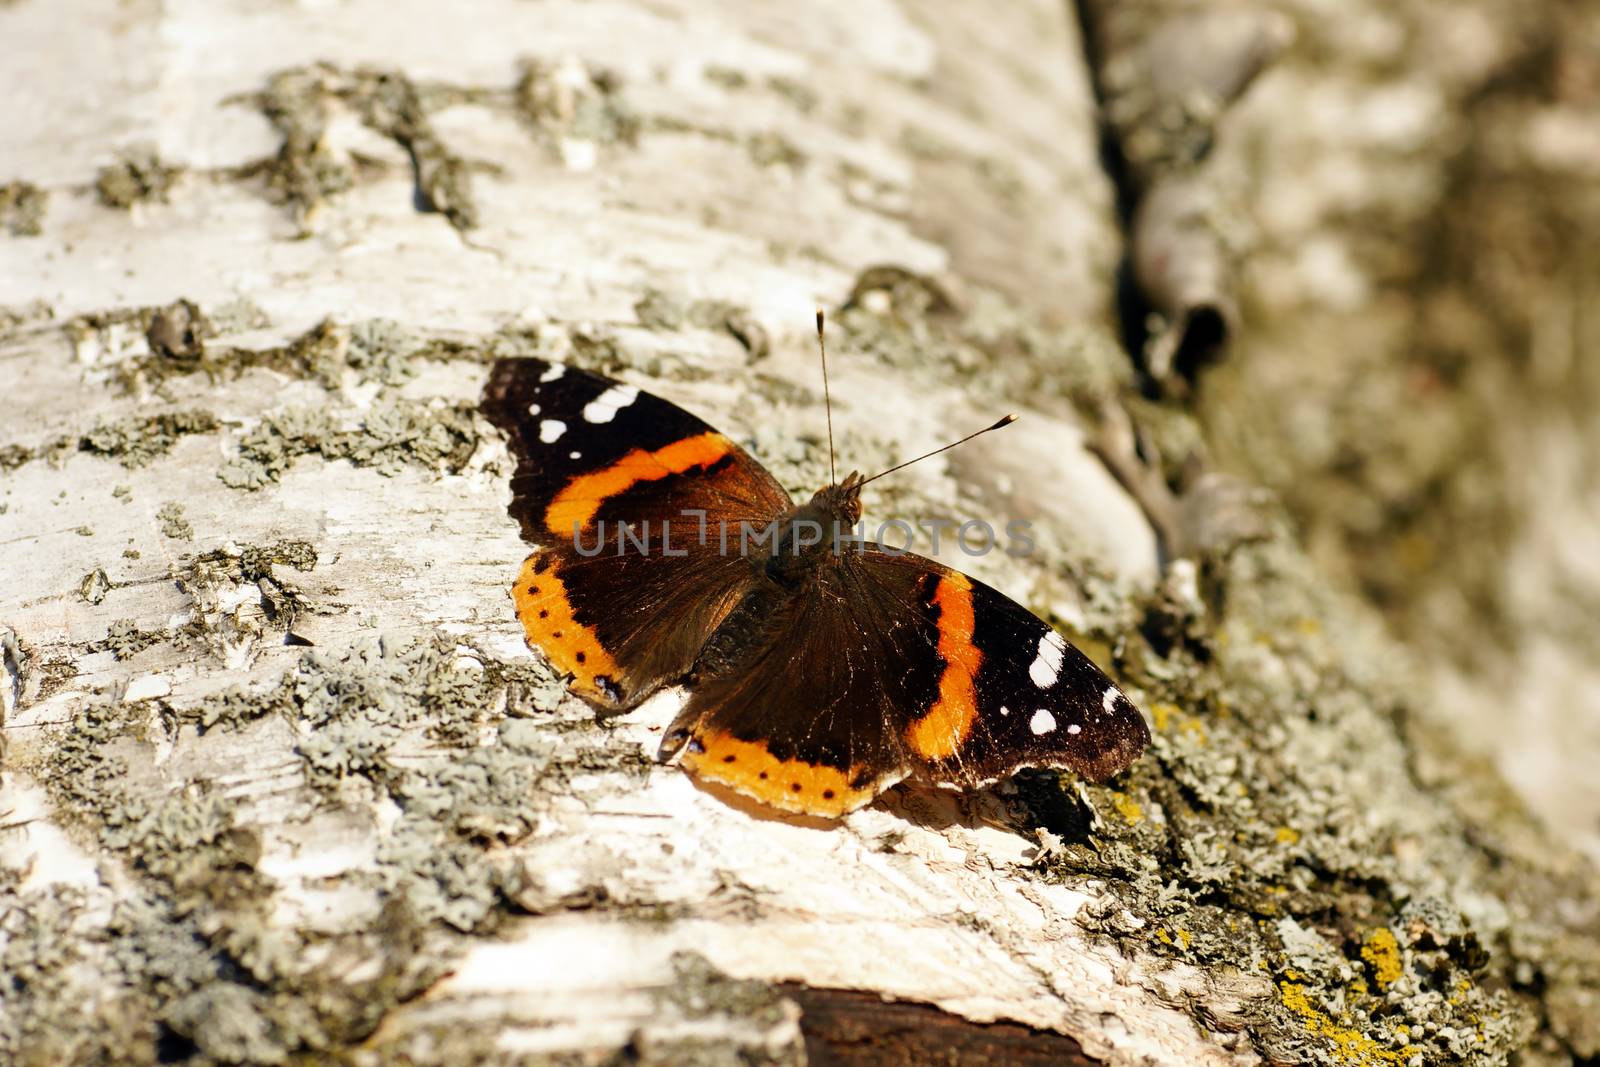 Red admiral butterfly by Mirage3